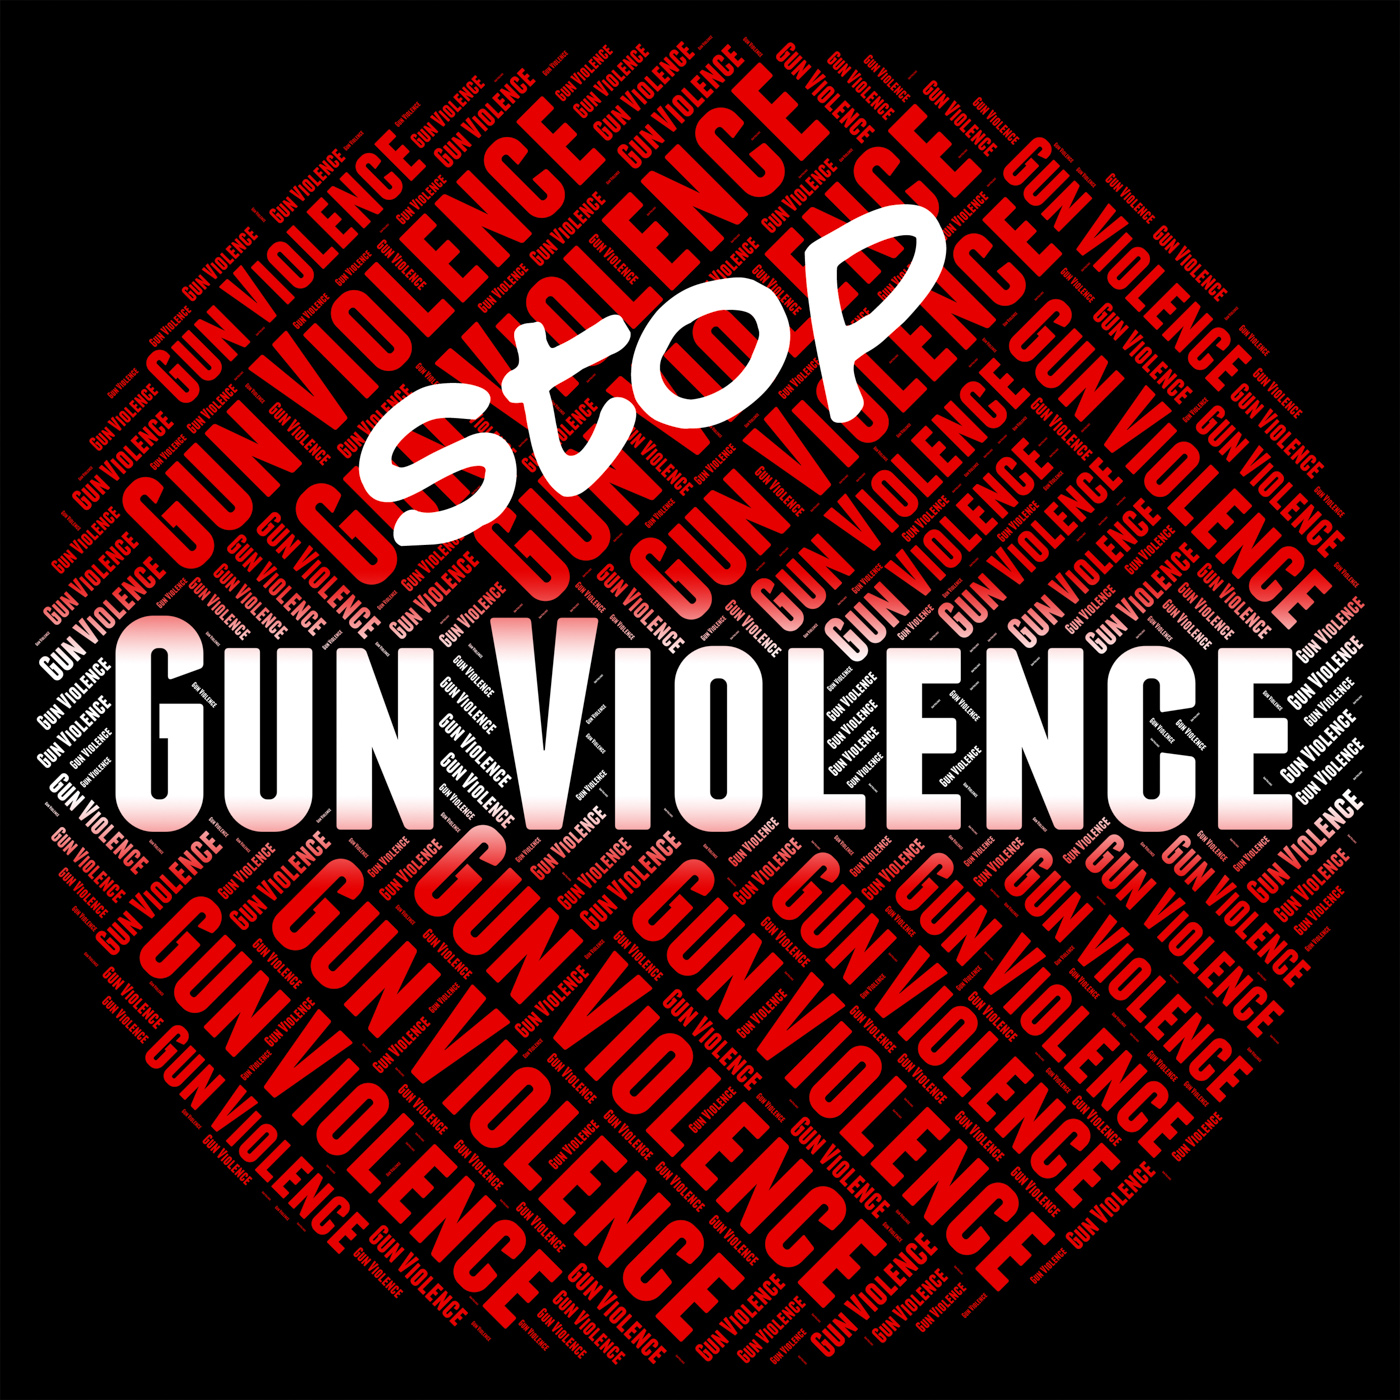 Stop gun violence shows brute force and brutality photo